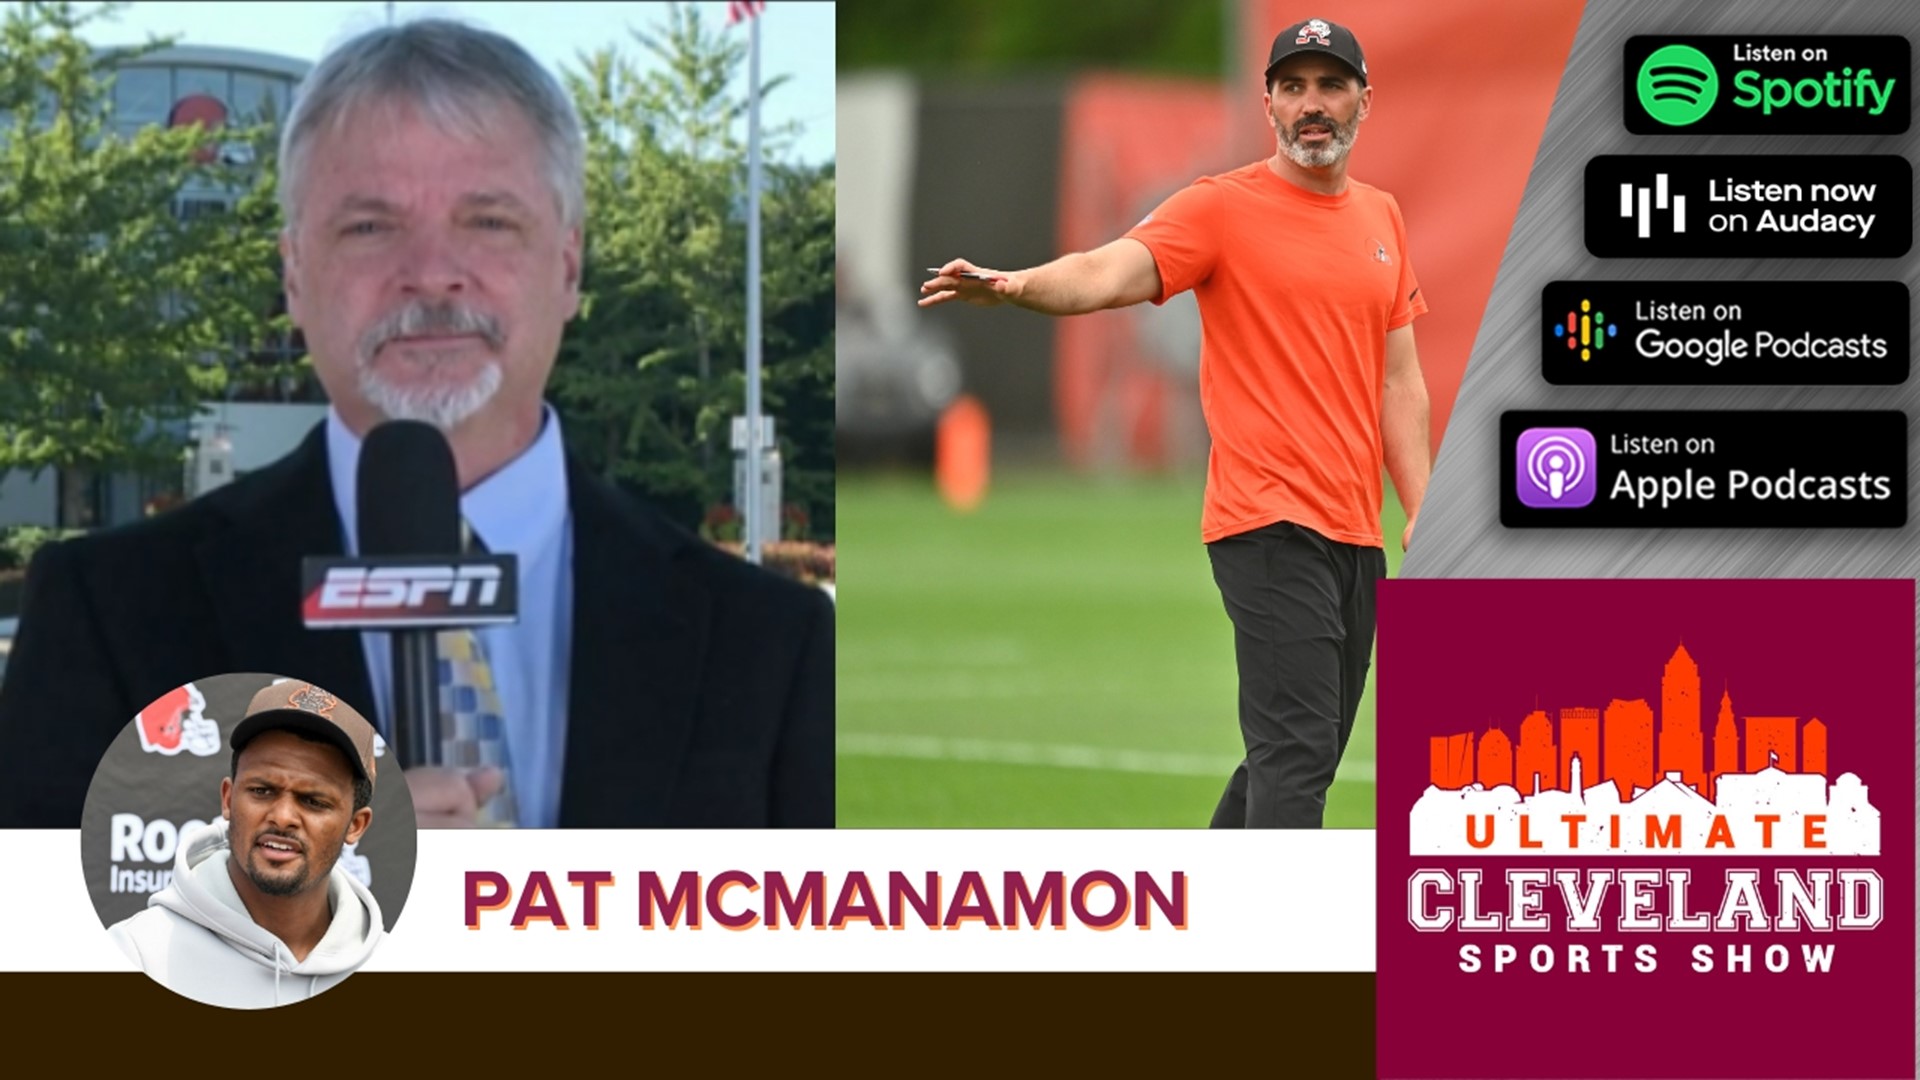 Pat McManamon gives insight into the Deshaun Watson allegations and believes that women are not believed when it comes to cases like this.